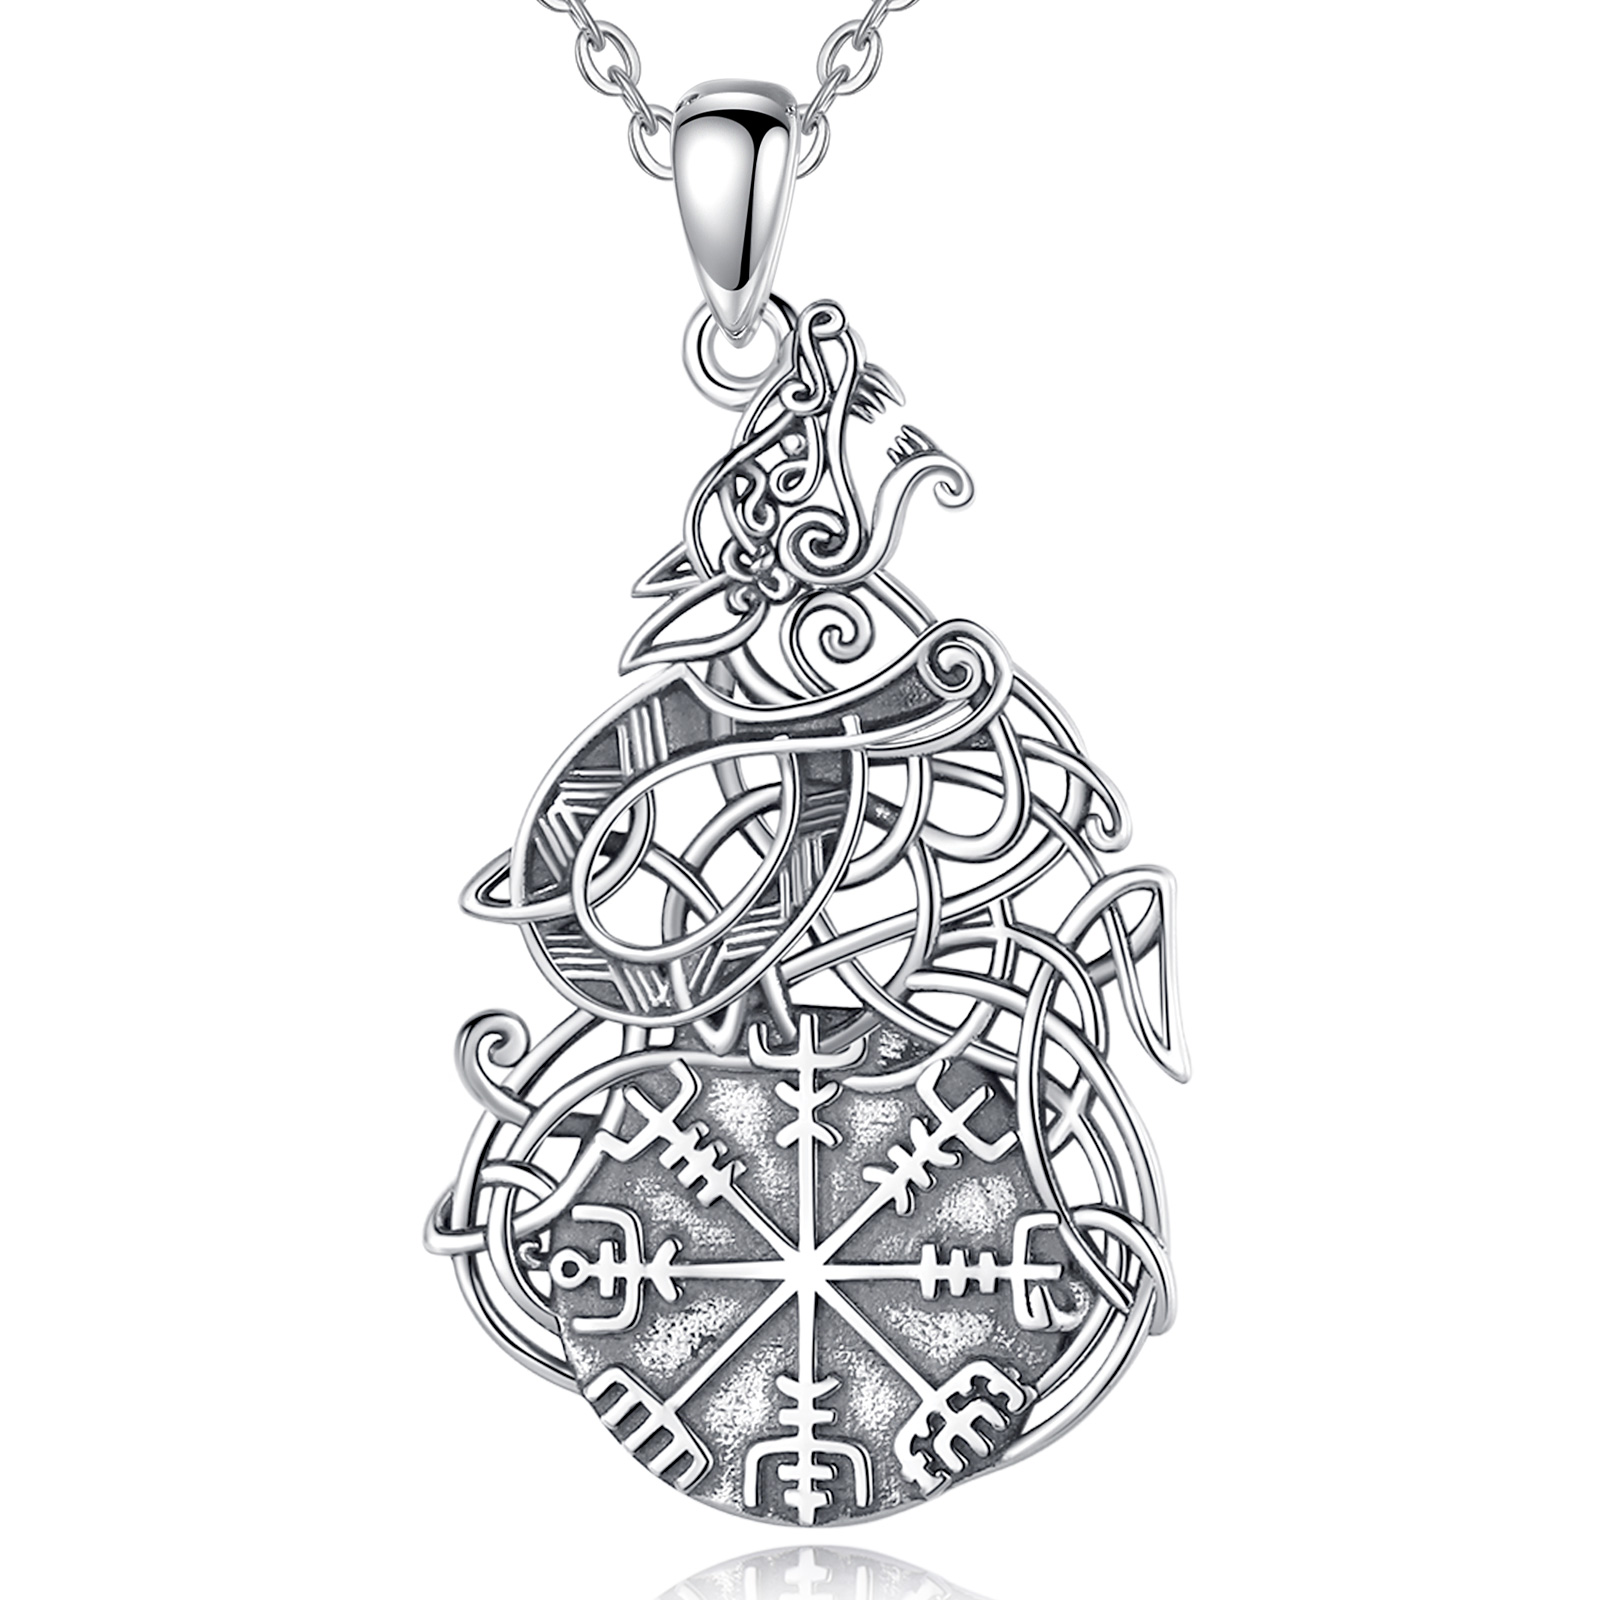 Merryshine 925 sterling silver hollow out celtic knot vikings wolf pendant necklace for men